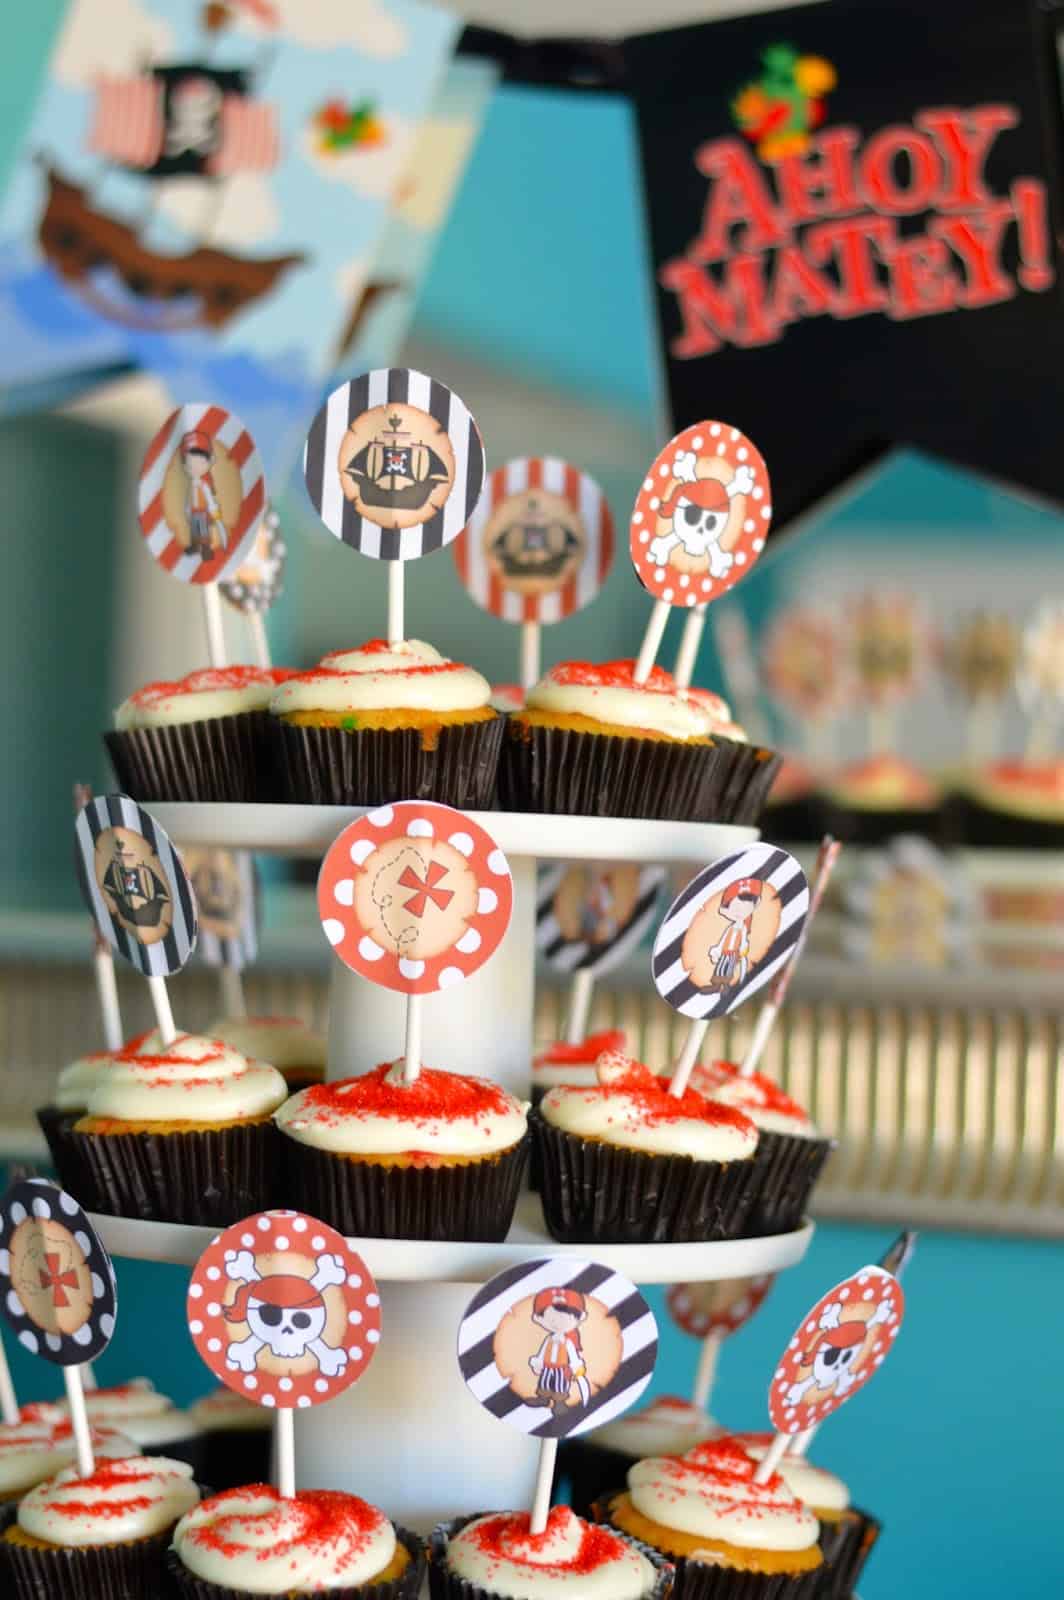 Pirate Themed Birthday Party: DIY Decorations, Food, and More!